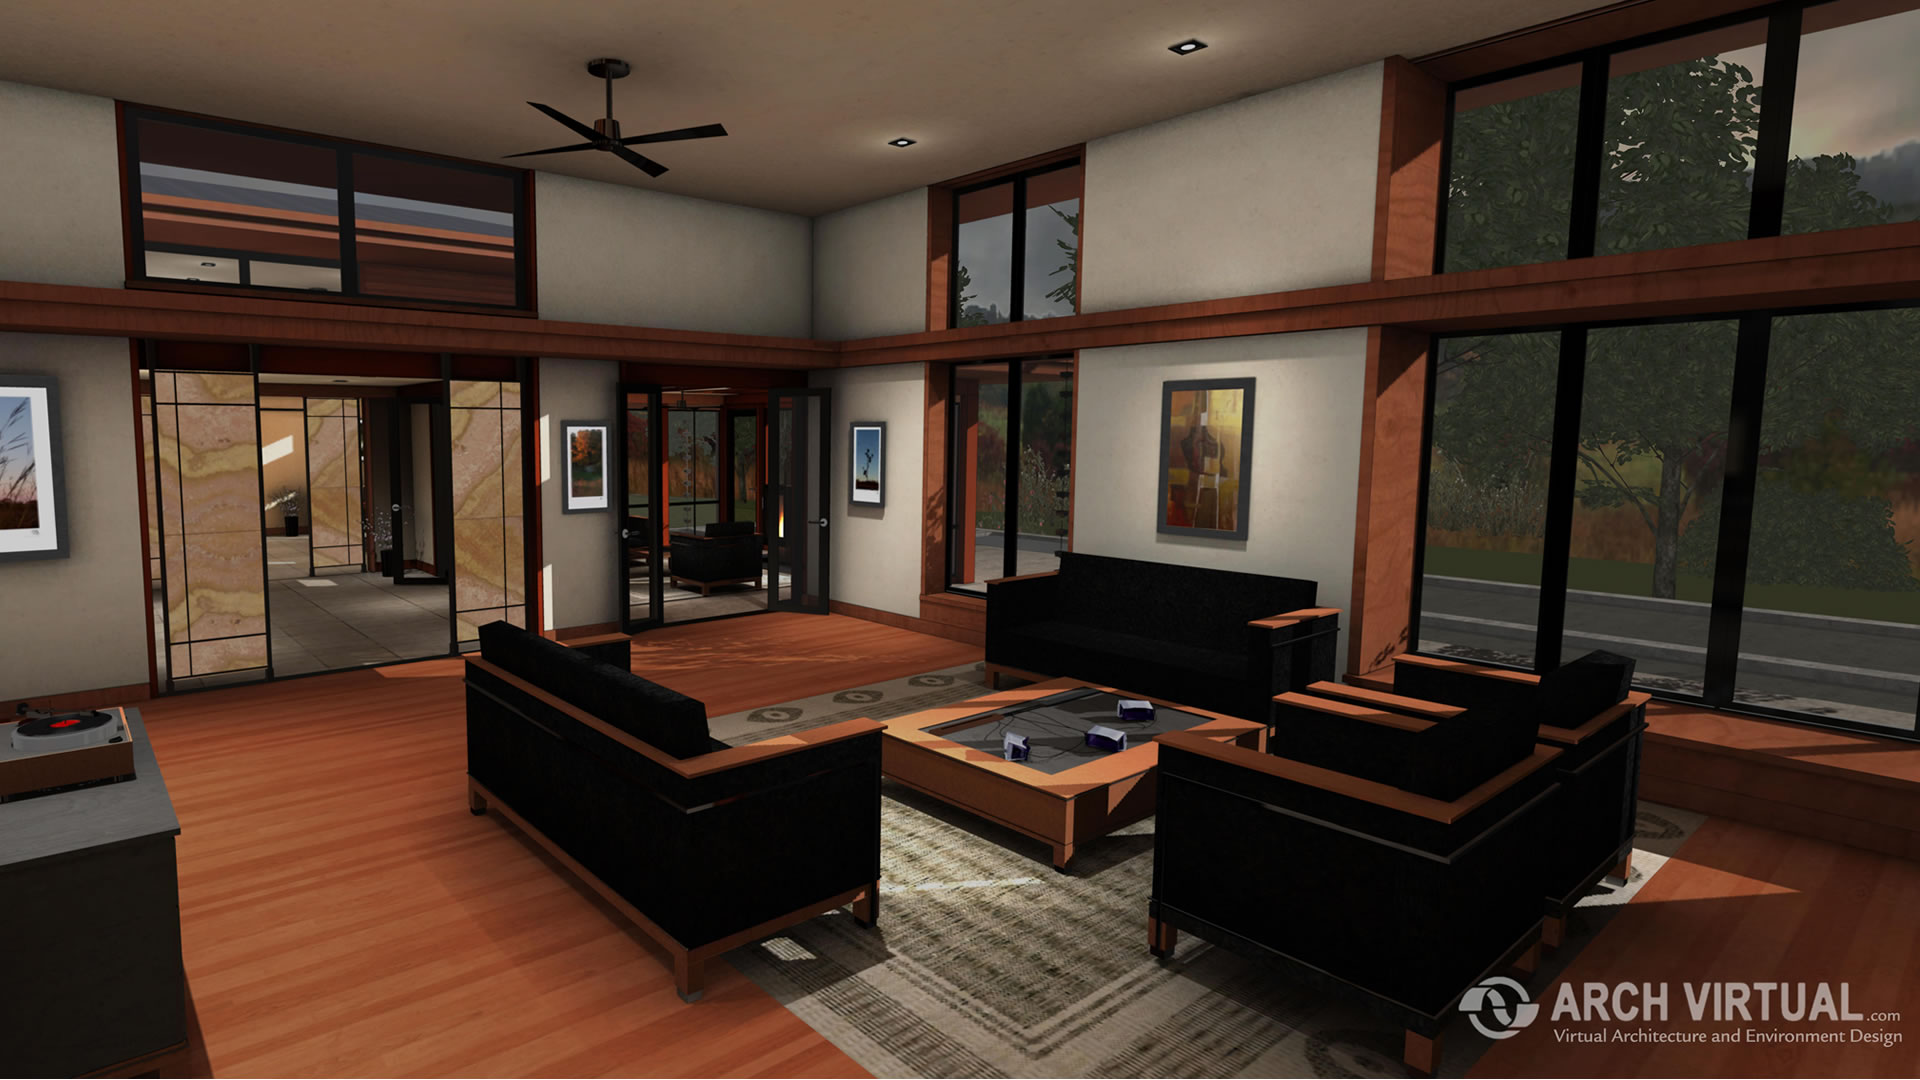 Real Estate Development Simulations And Pre Sales Marketing